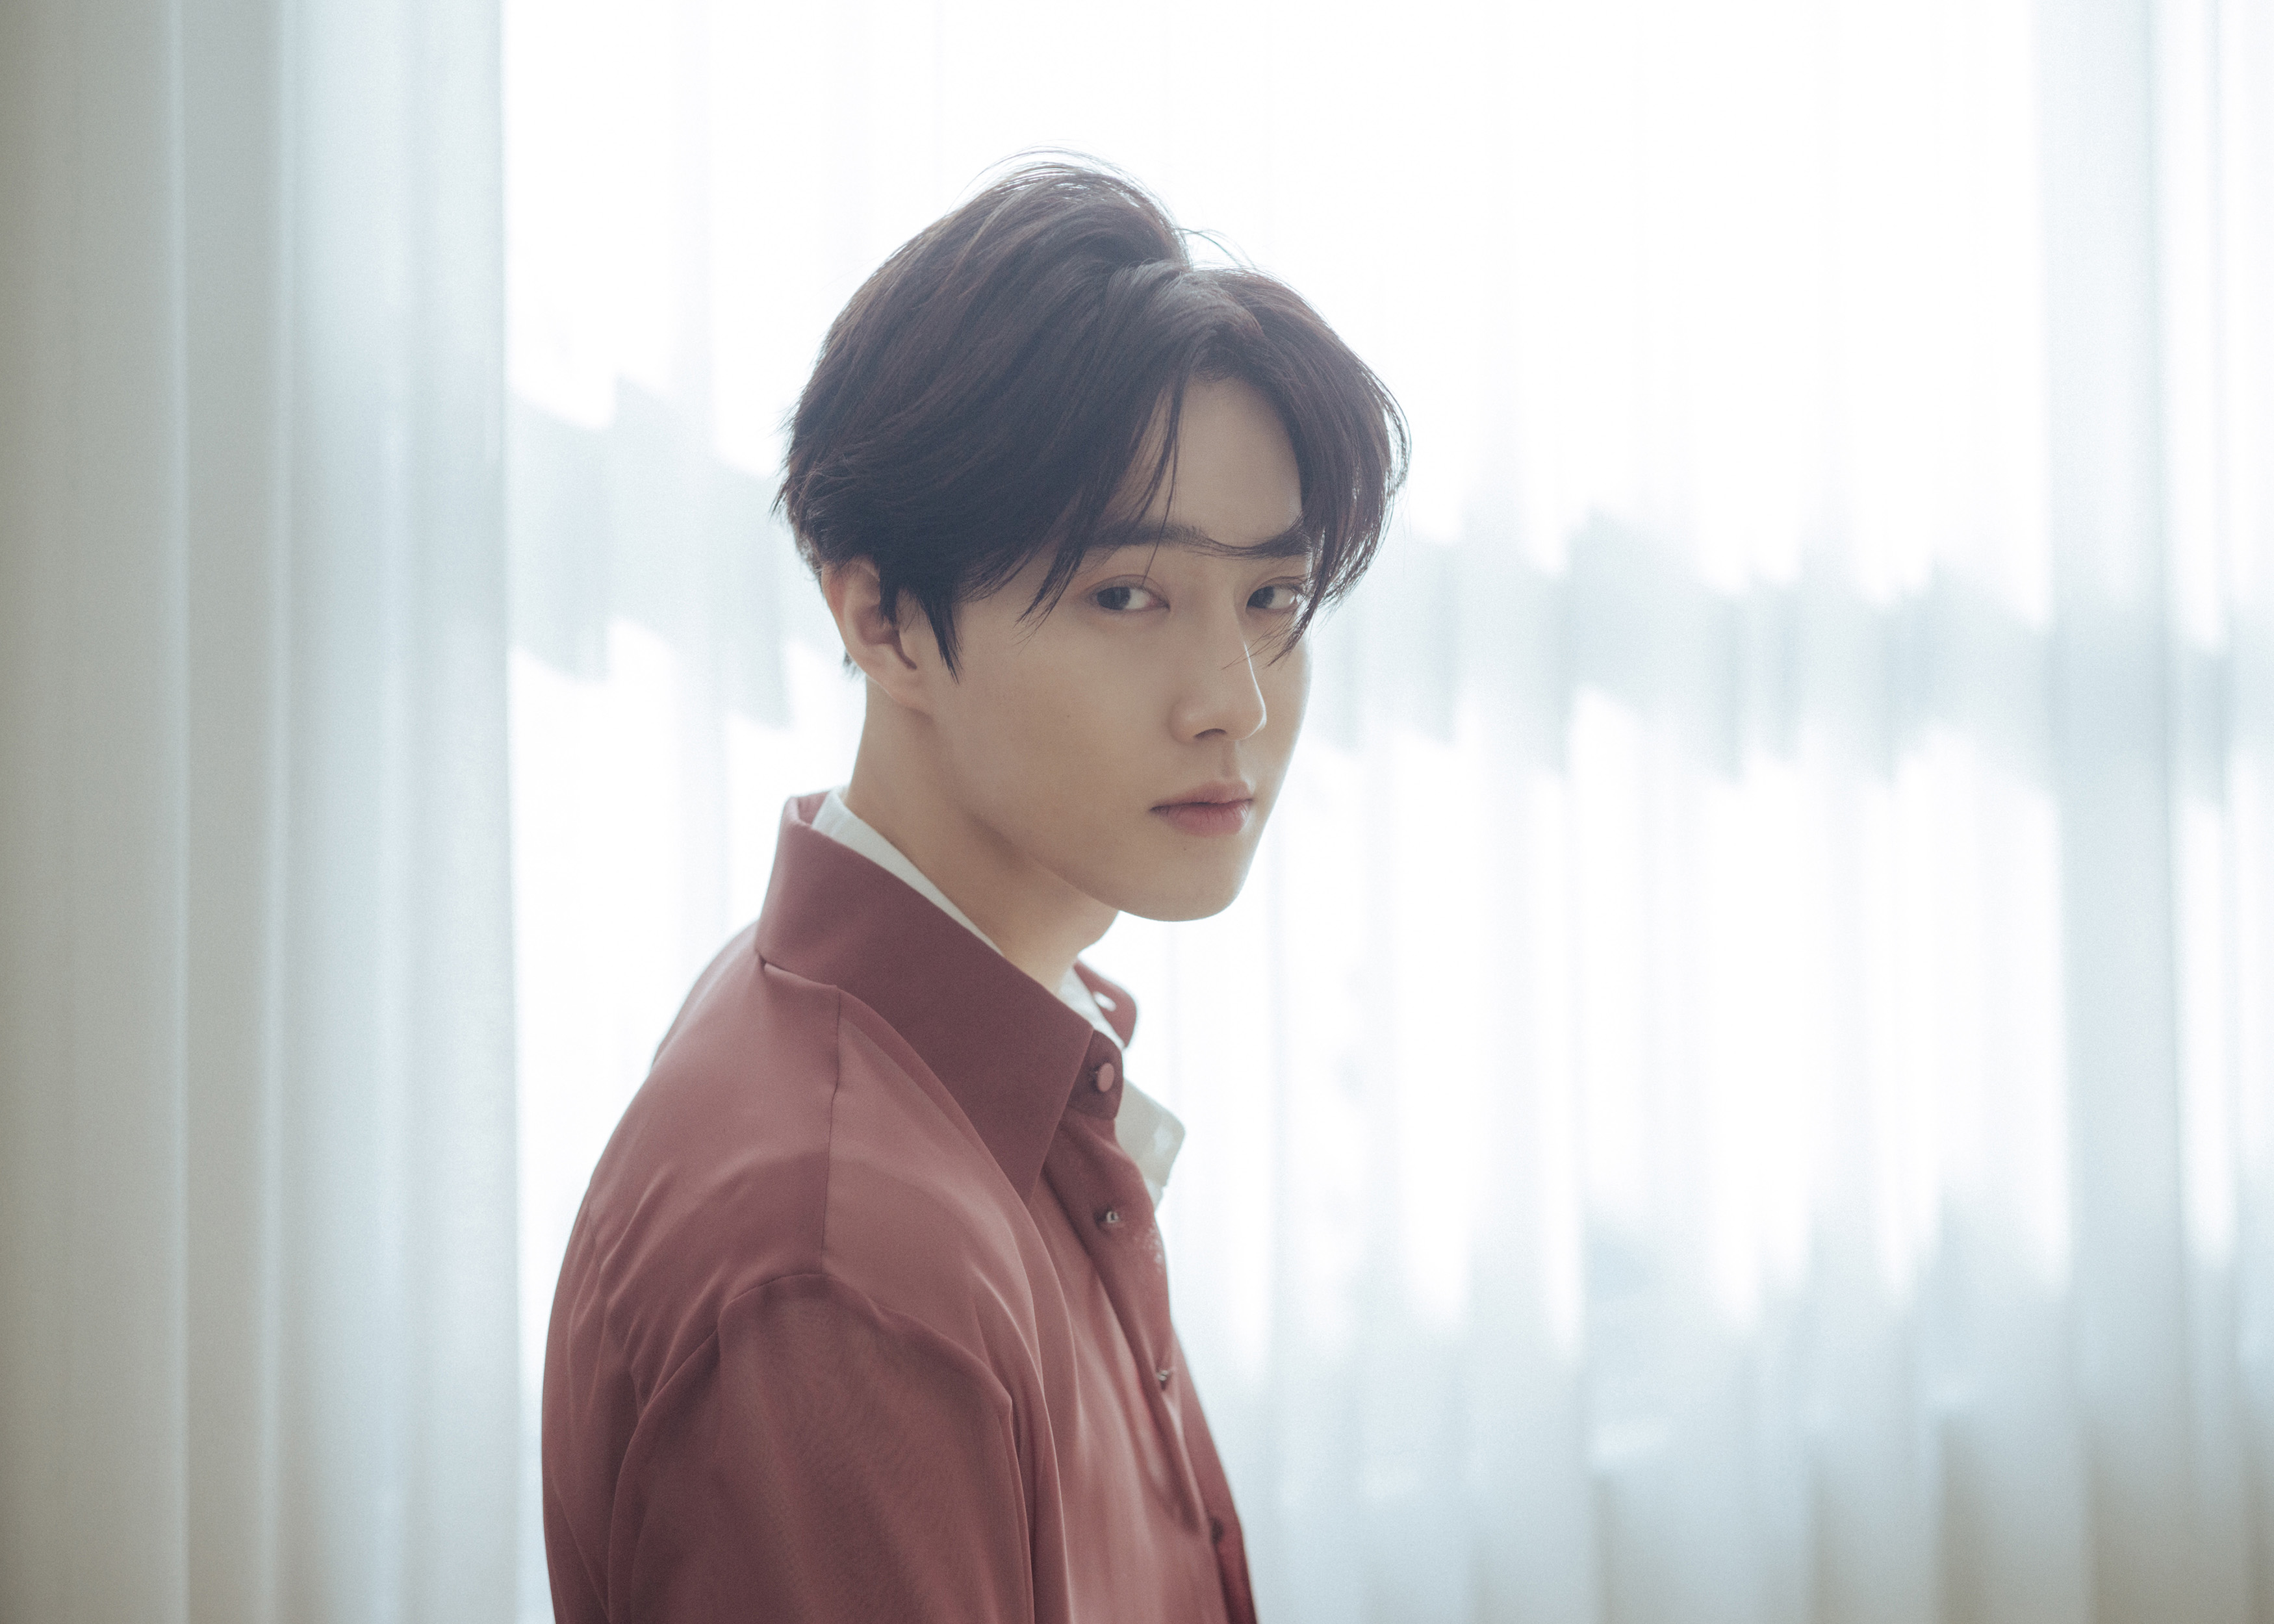 EXO Suho taps emotion this spring with the title song of her first Solo album, Love, Lets Love.Suho will release its first Mini album, Self-Portrait, on the 30th.The album includes a total of six songs, including the title track Love, Lets Love.Especially, the title song Love, Lets Love is a modern rock genre with lyrical melody and warm atmosphere. The lyrics contain a message to encourage each other to love even if it is poor and lacking in expressing love, and Suhos sweet voice doubles the charm of the song.In addition, Suho participated in the concept planning as well as the title song lyrics, and the title of the song, Love, Hazard (Lets Love), utilized the team slogan of EXO made by Suho, and added the identity of Suho as an EXO leader and the meaning of fan love, so explosive response of global music fans is expected.Also, at 0 oclock today (18th), mood sampler images and teaser images were released through Suhos official website and various SNS EXO accounts, and the emotional atmosphere of this album and the warm visuals of Suho were caught.Meanwhile, Suhos first Mini album, Self-Portrait, is also released on March 30 as a record.iMBC  Photos